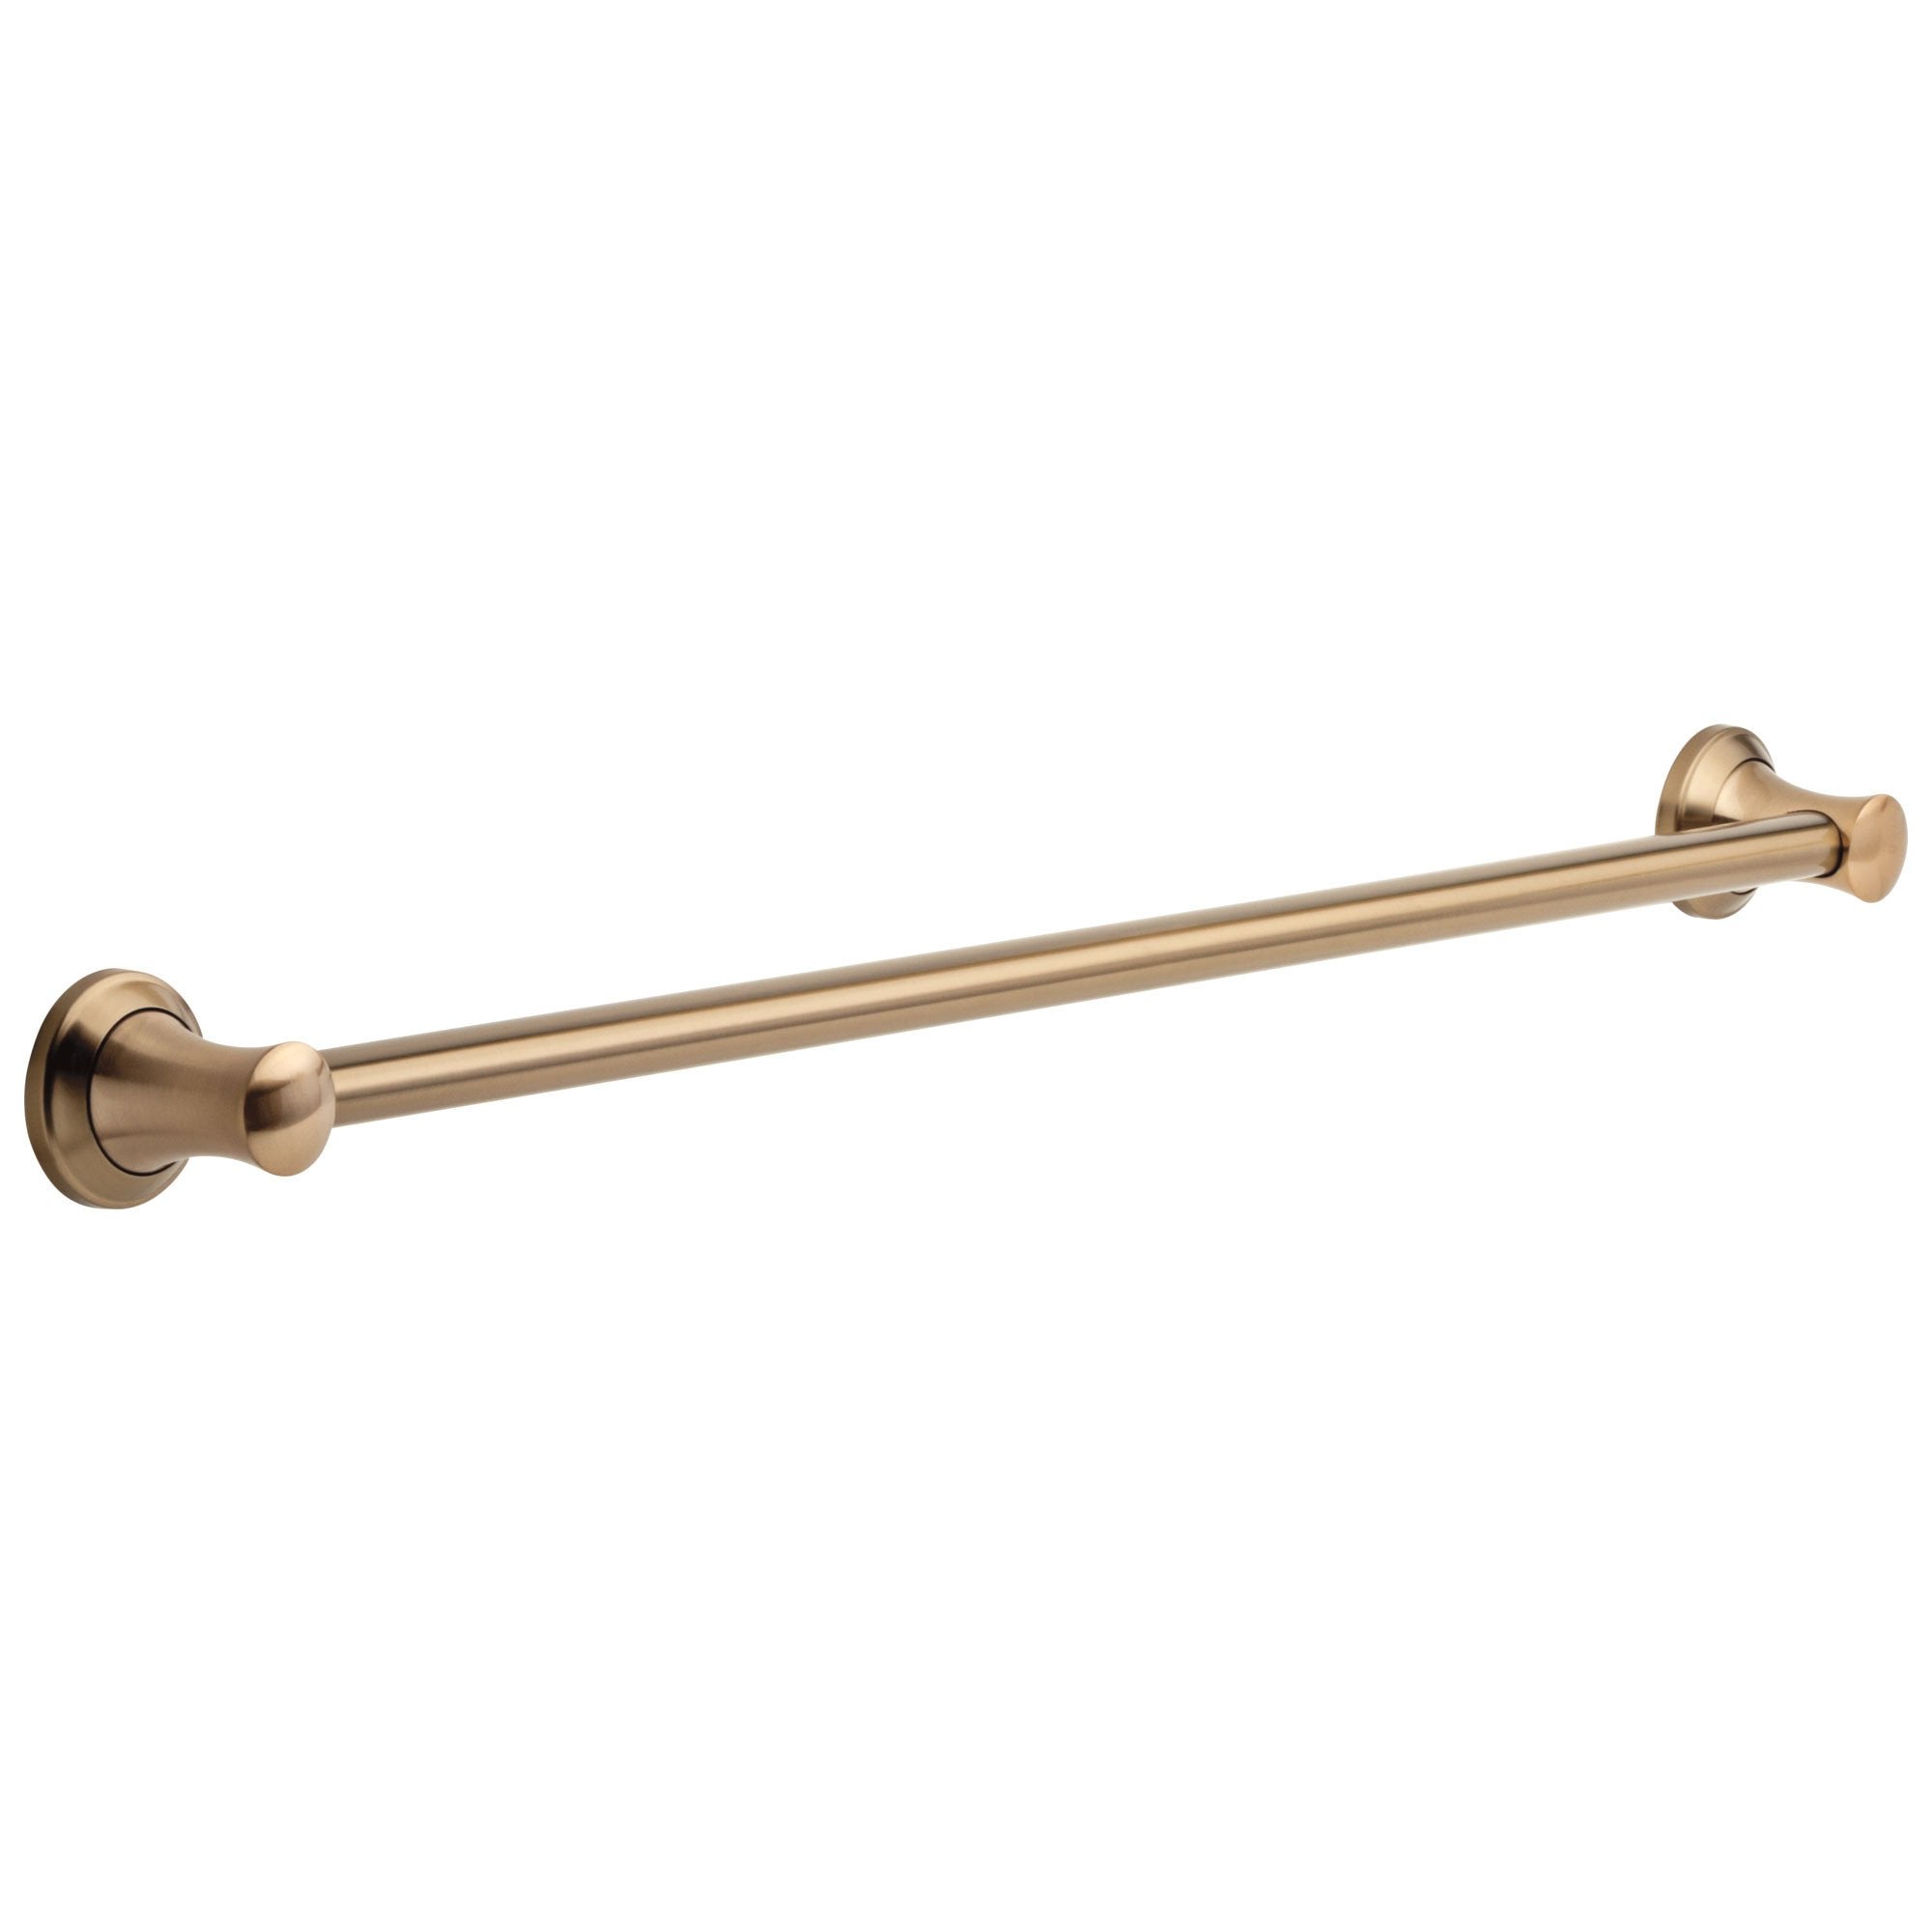 Delta Bath Safety Collection Champagne Bronze Finish Transitional Style Decorative ADA Approved Bathroom or Shower Long 36" Grab Bar D41736CZ